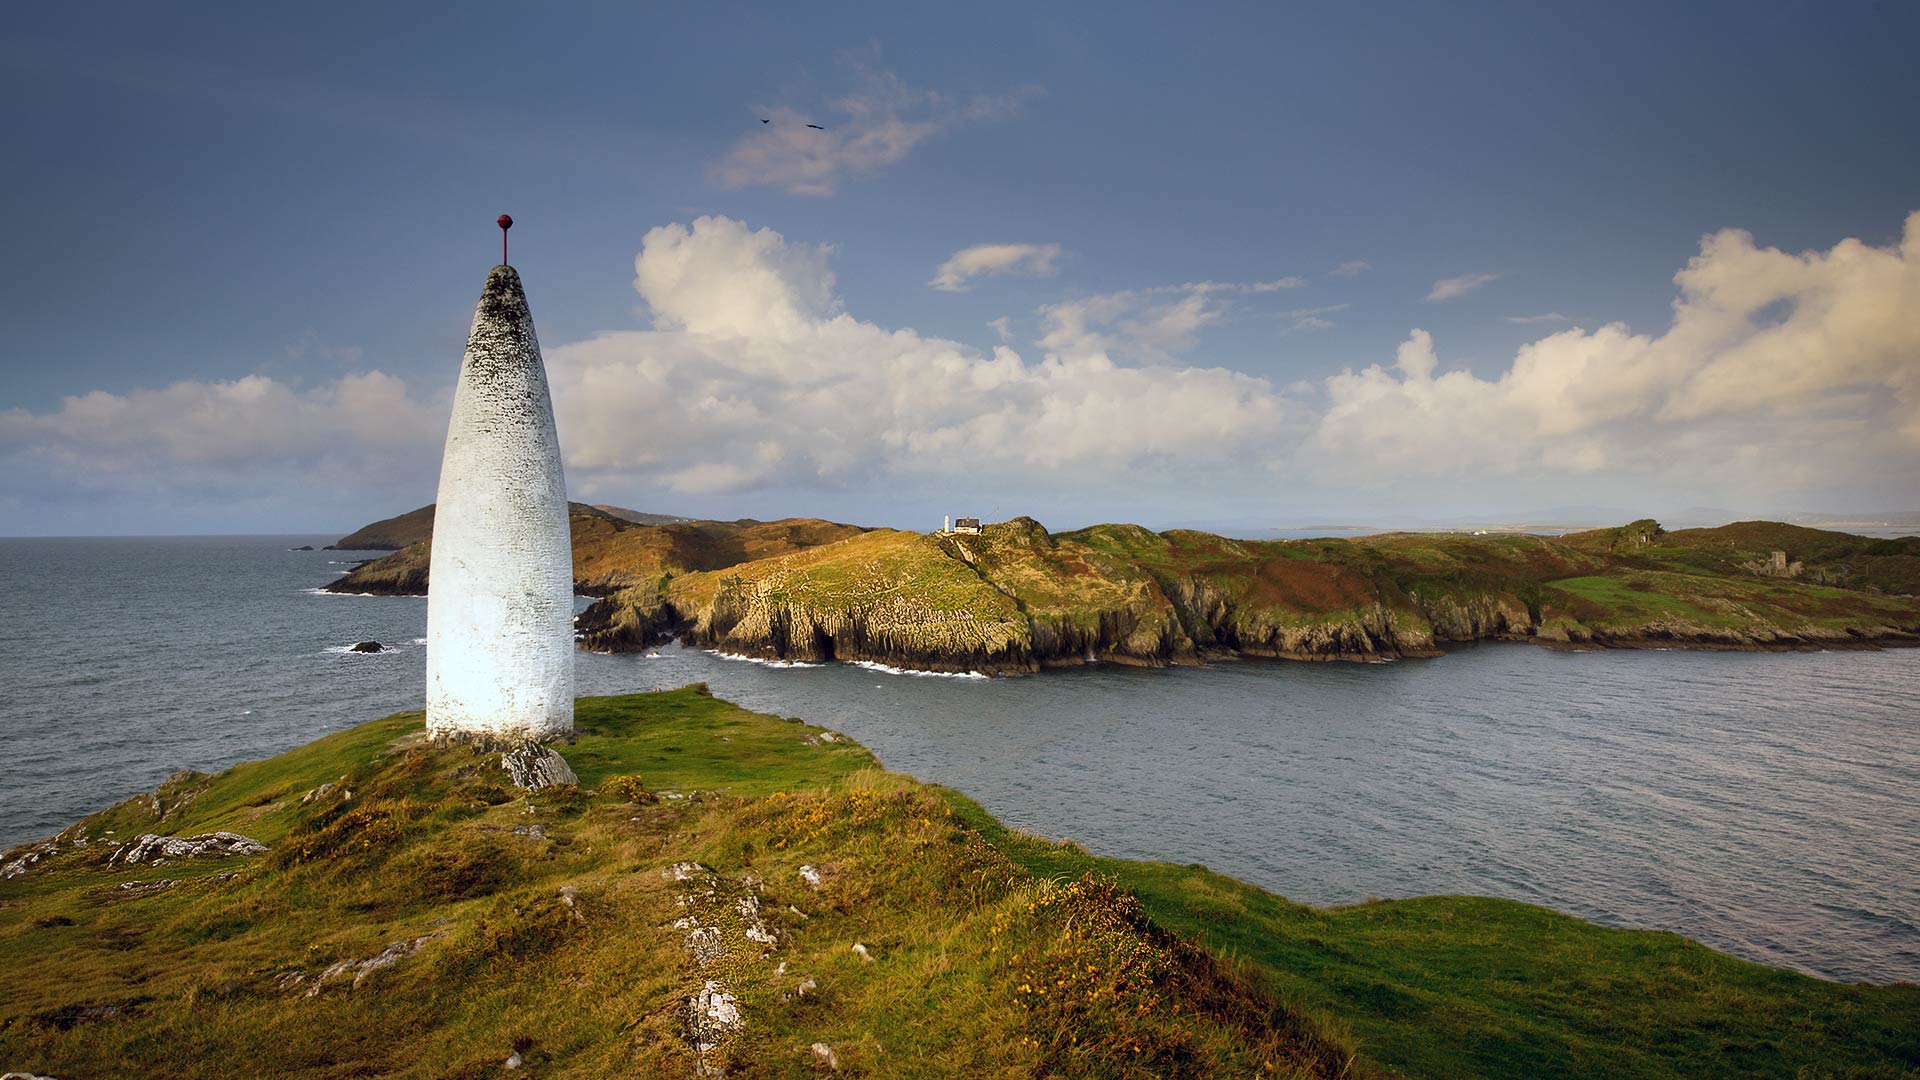 A Seaside monument and rugged landscape on the Wild Atlantic Way